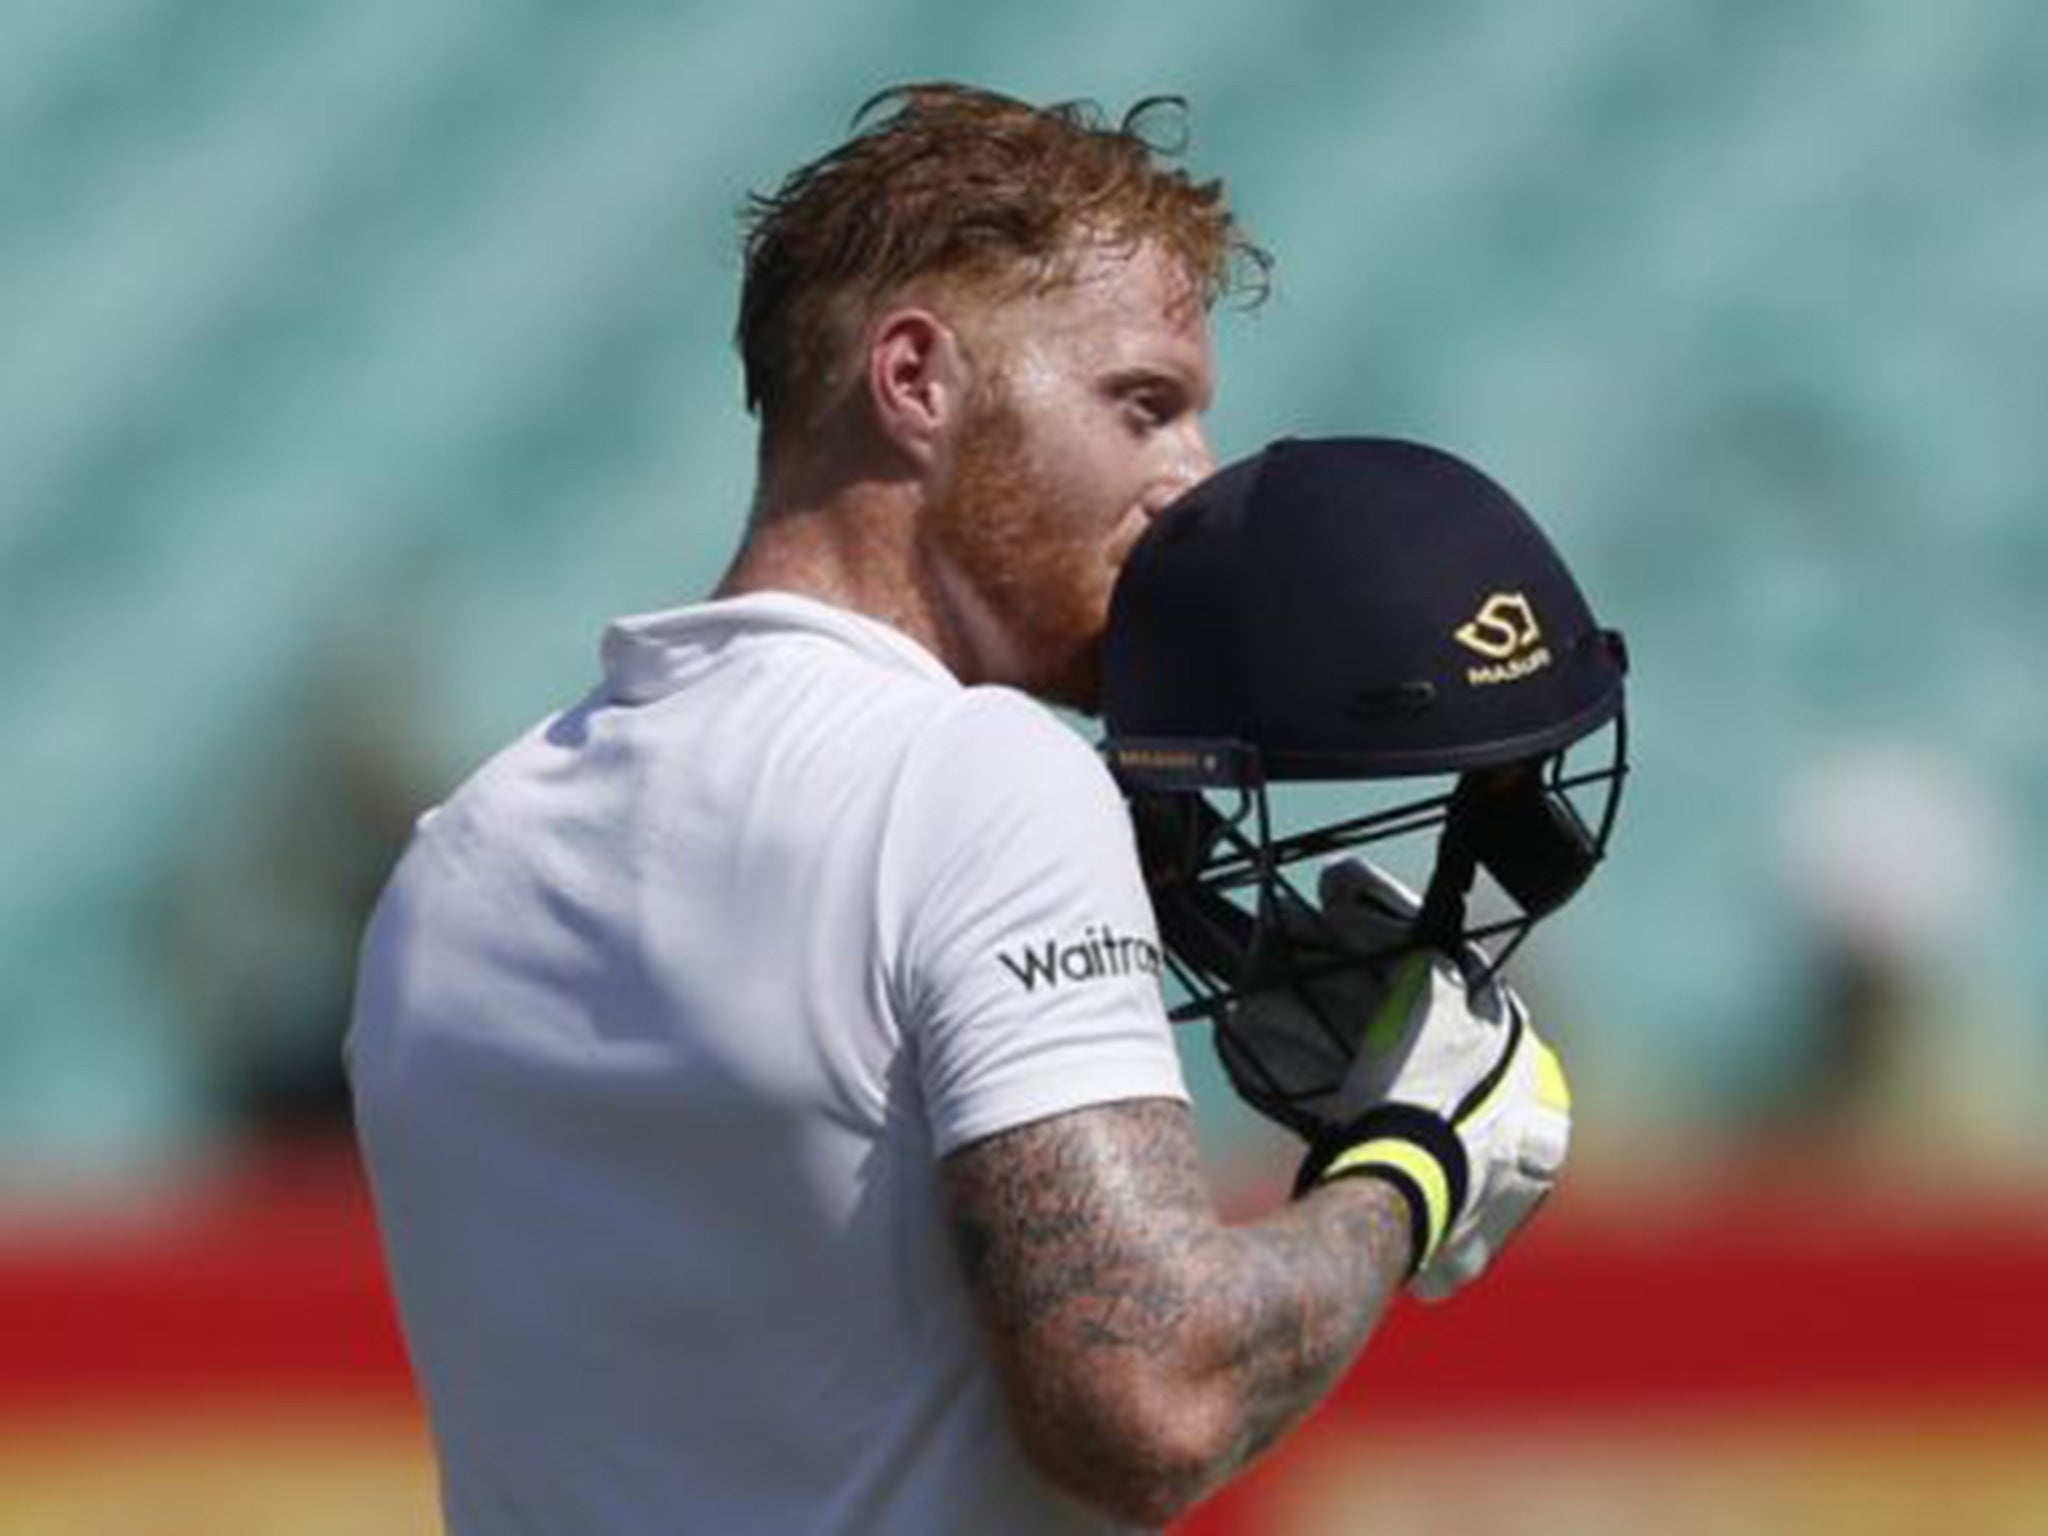 Stokes scored his fourth Test century for England in Rajkot